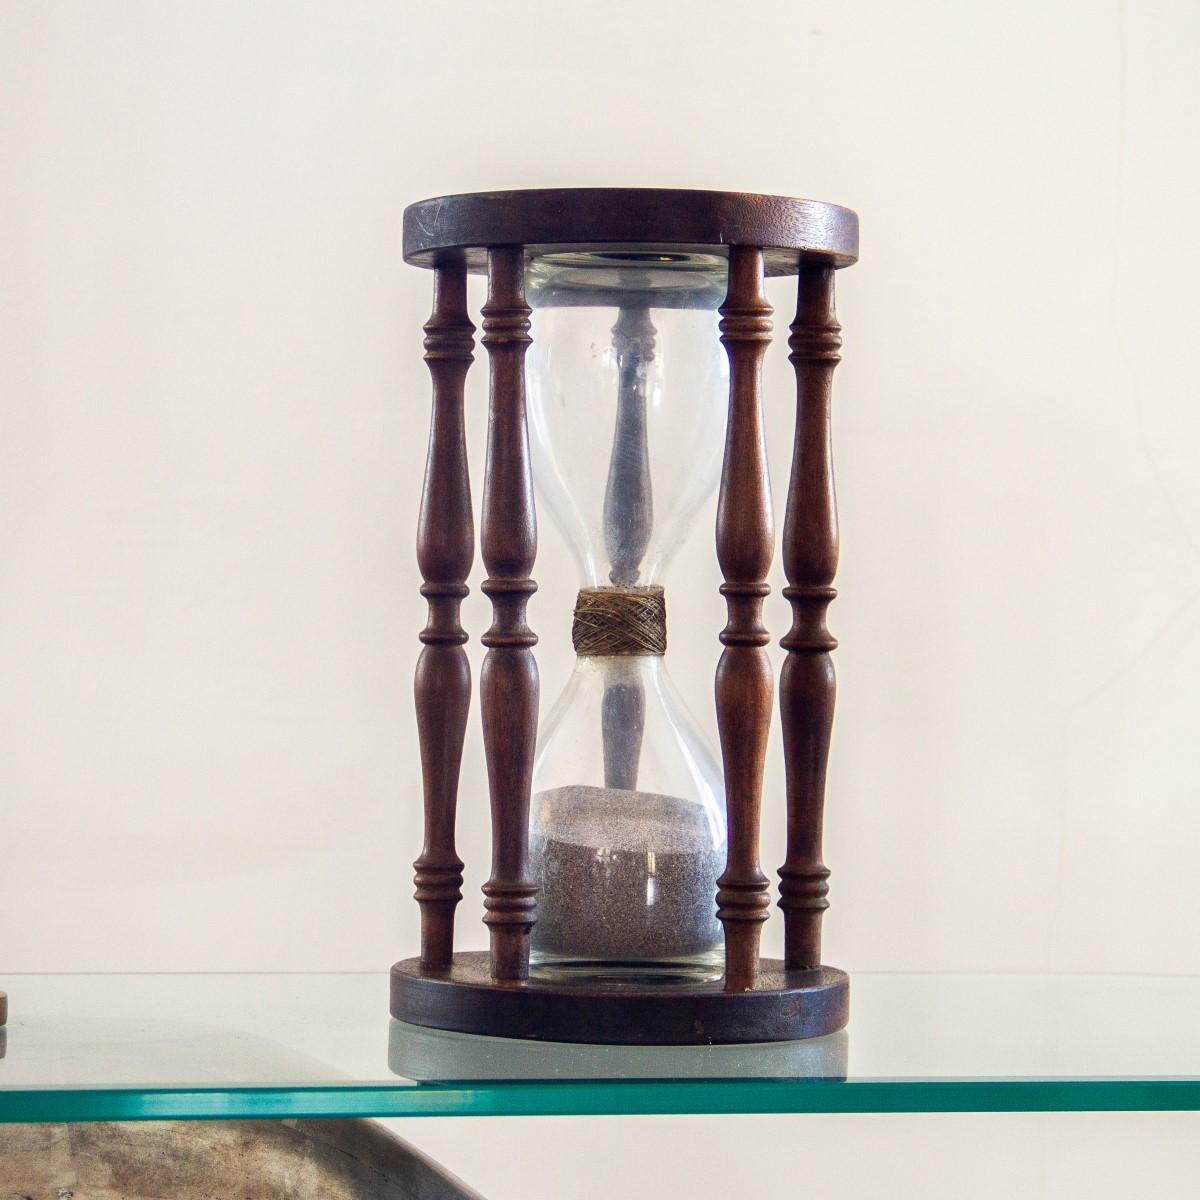 A large 19th century hourglass with clear glass blown bulbs woven together, the sand timer is housed within a wooden stand, which has circular ends joined by four turned balusters.

Excellent antique condition.